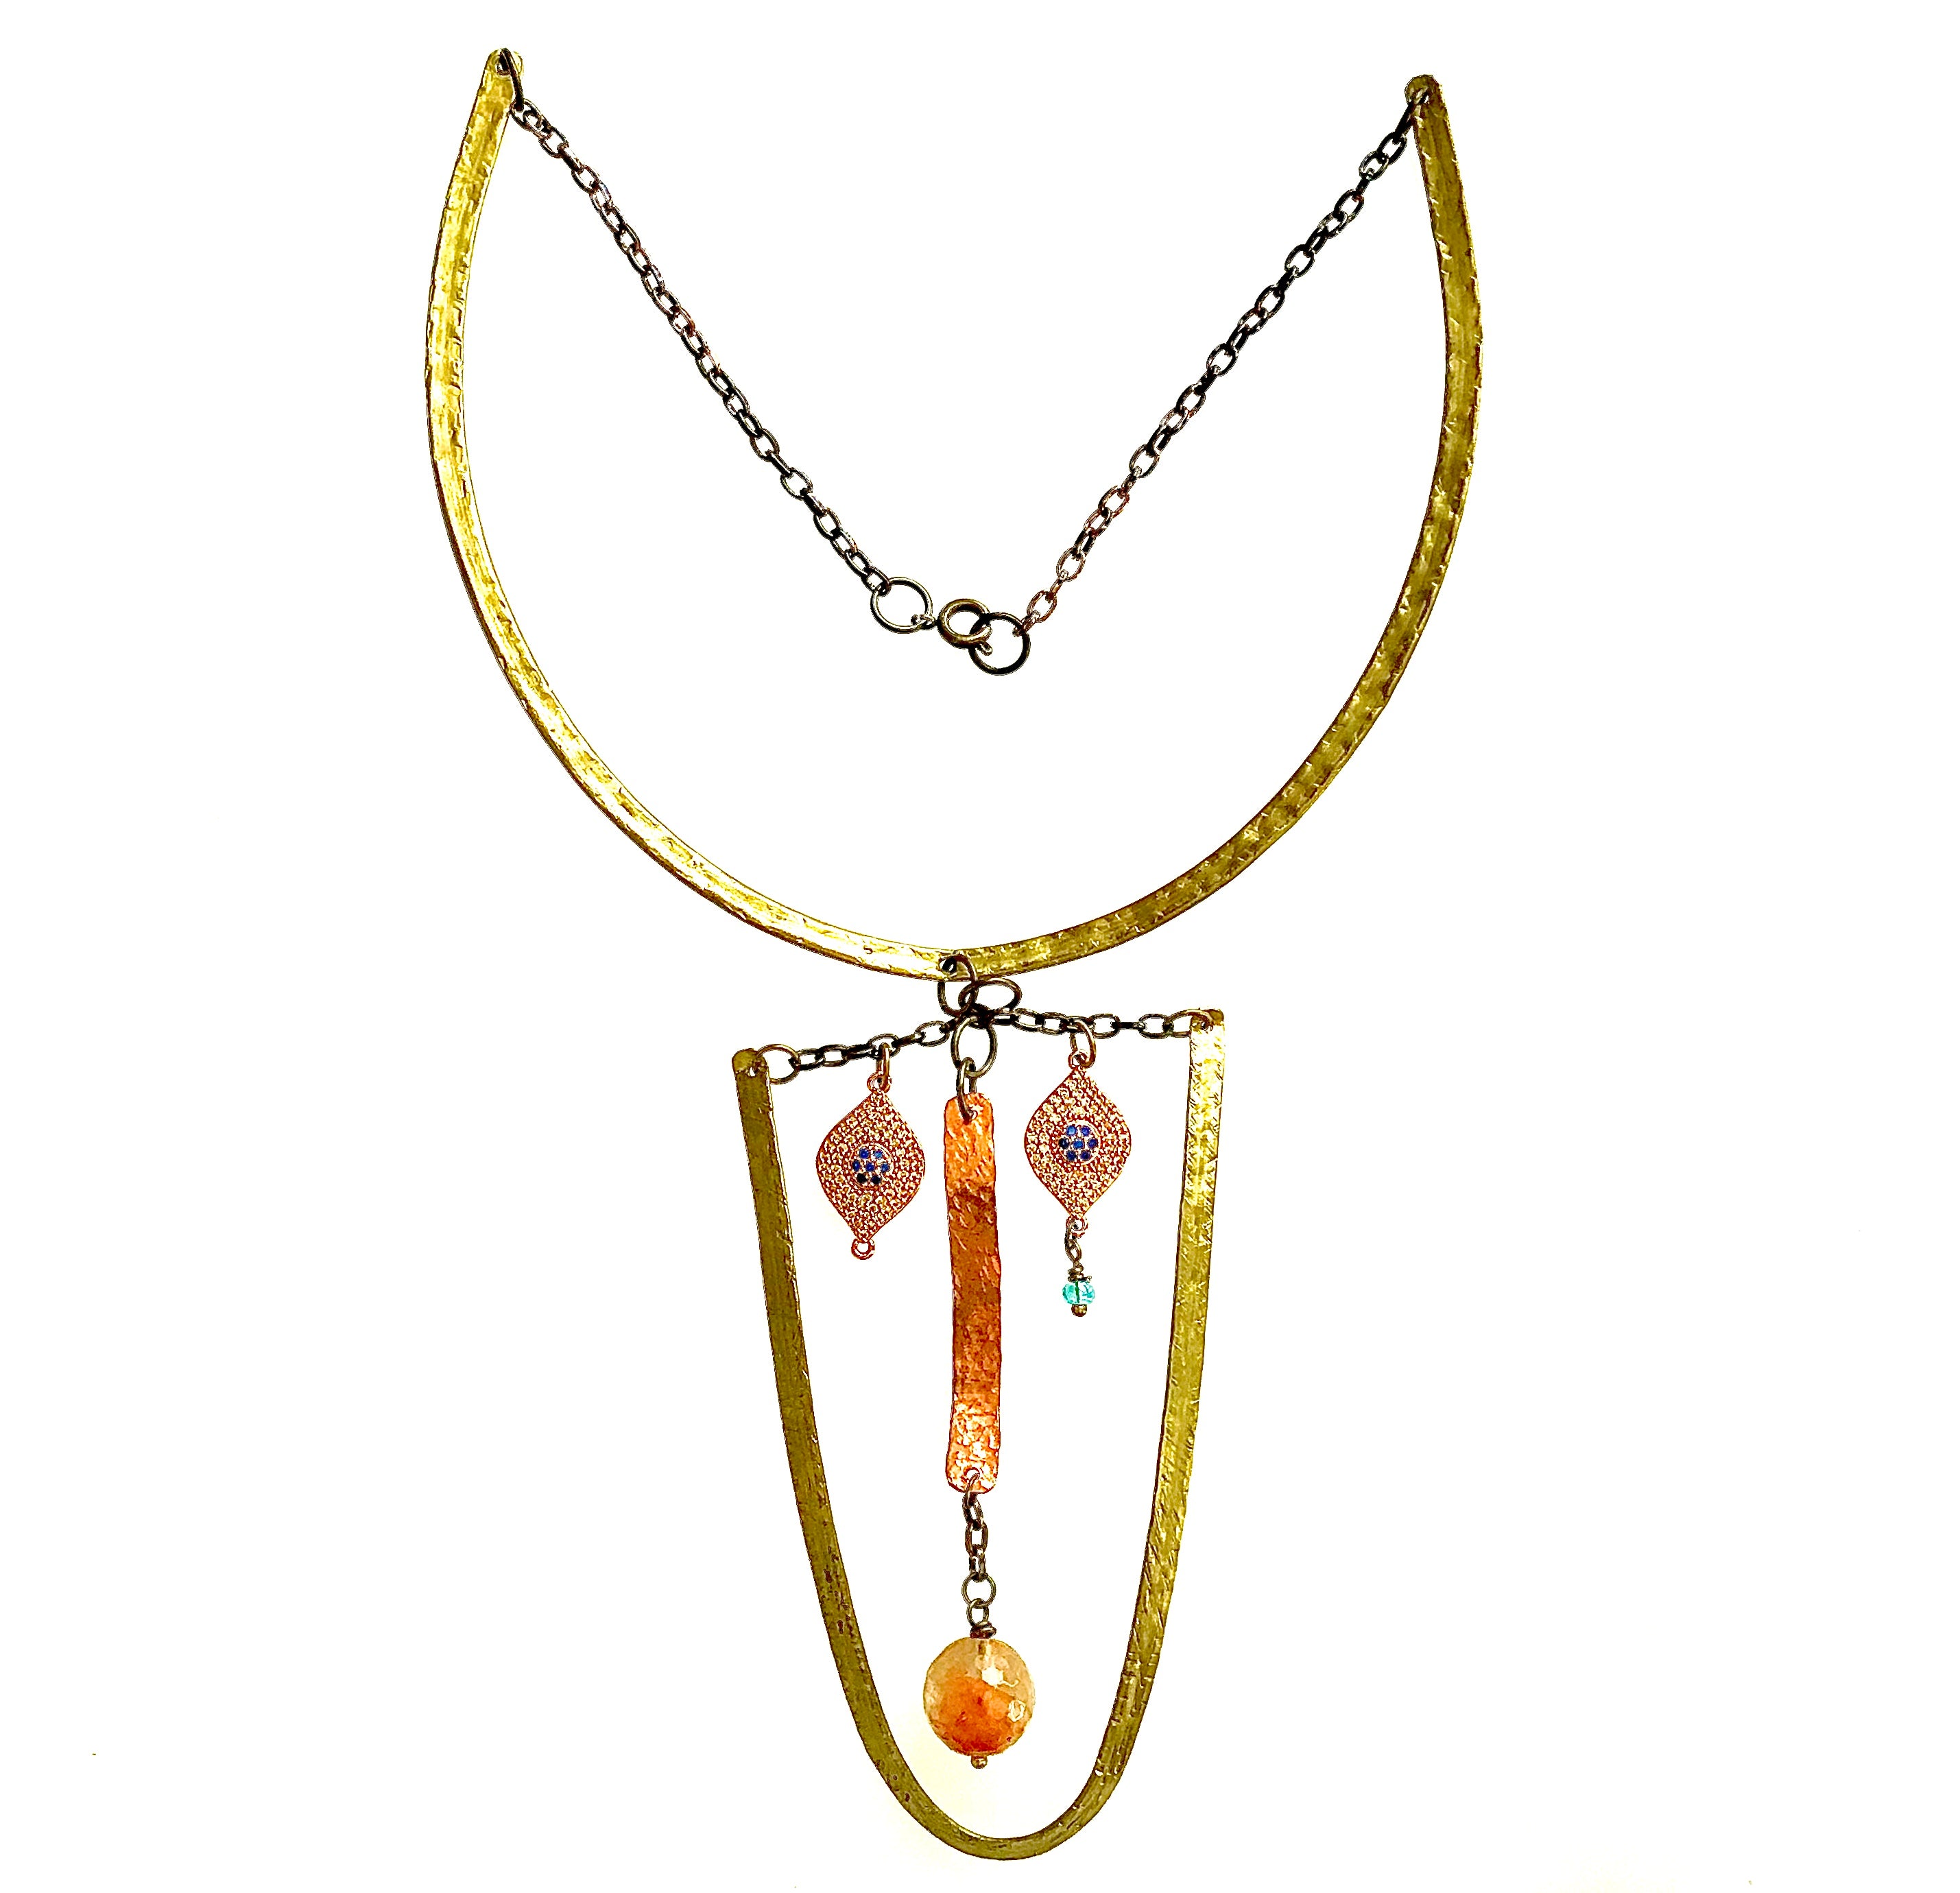 Brass collar necklace with elongated face made of hammered brass, eyes made of evil eye charms, nose made of hammered, curved copper suspended in middle from a length of chain. Copper has a round agate bead hanging to make the mouth.